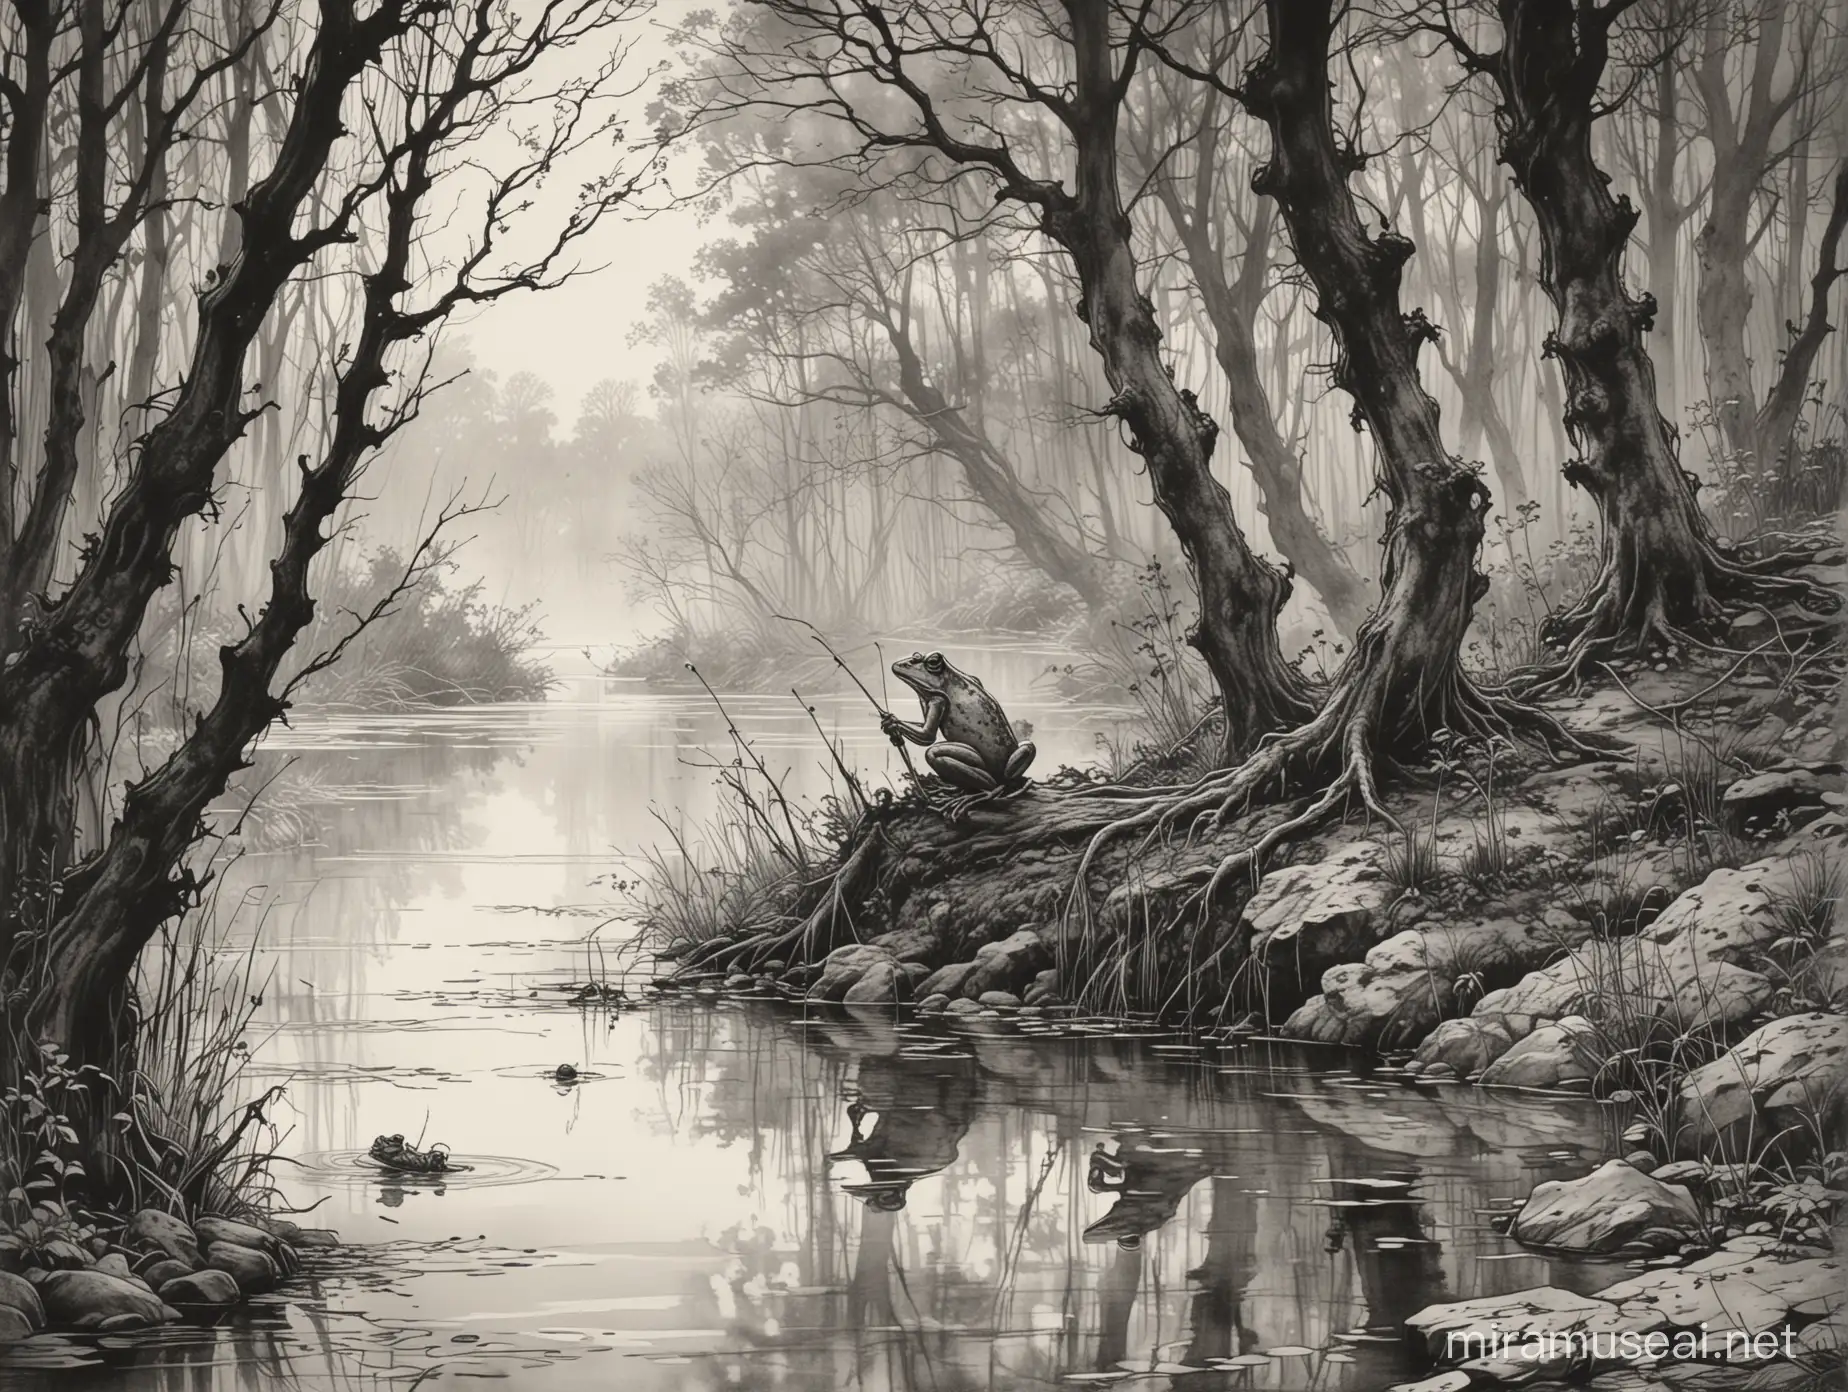 frog fishing on a riverbank, forest, old trees, ink, black and white, arthur rackham style